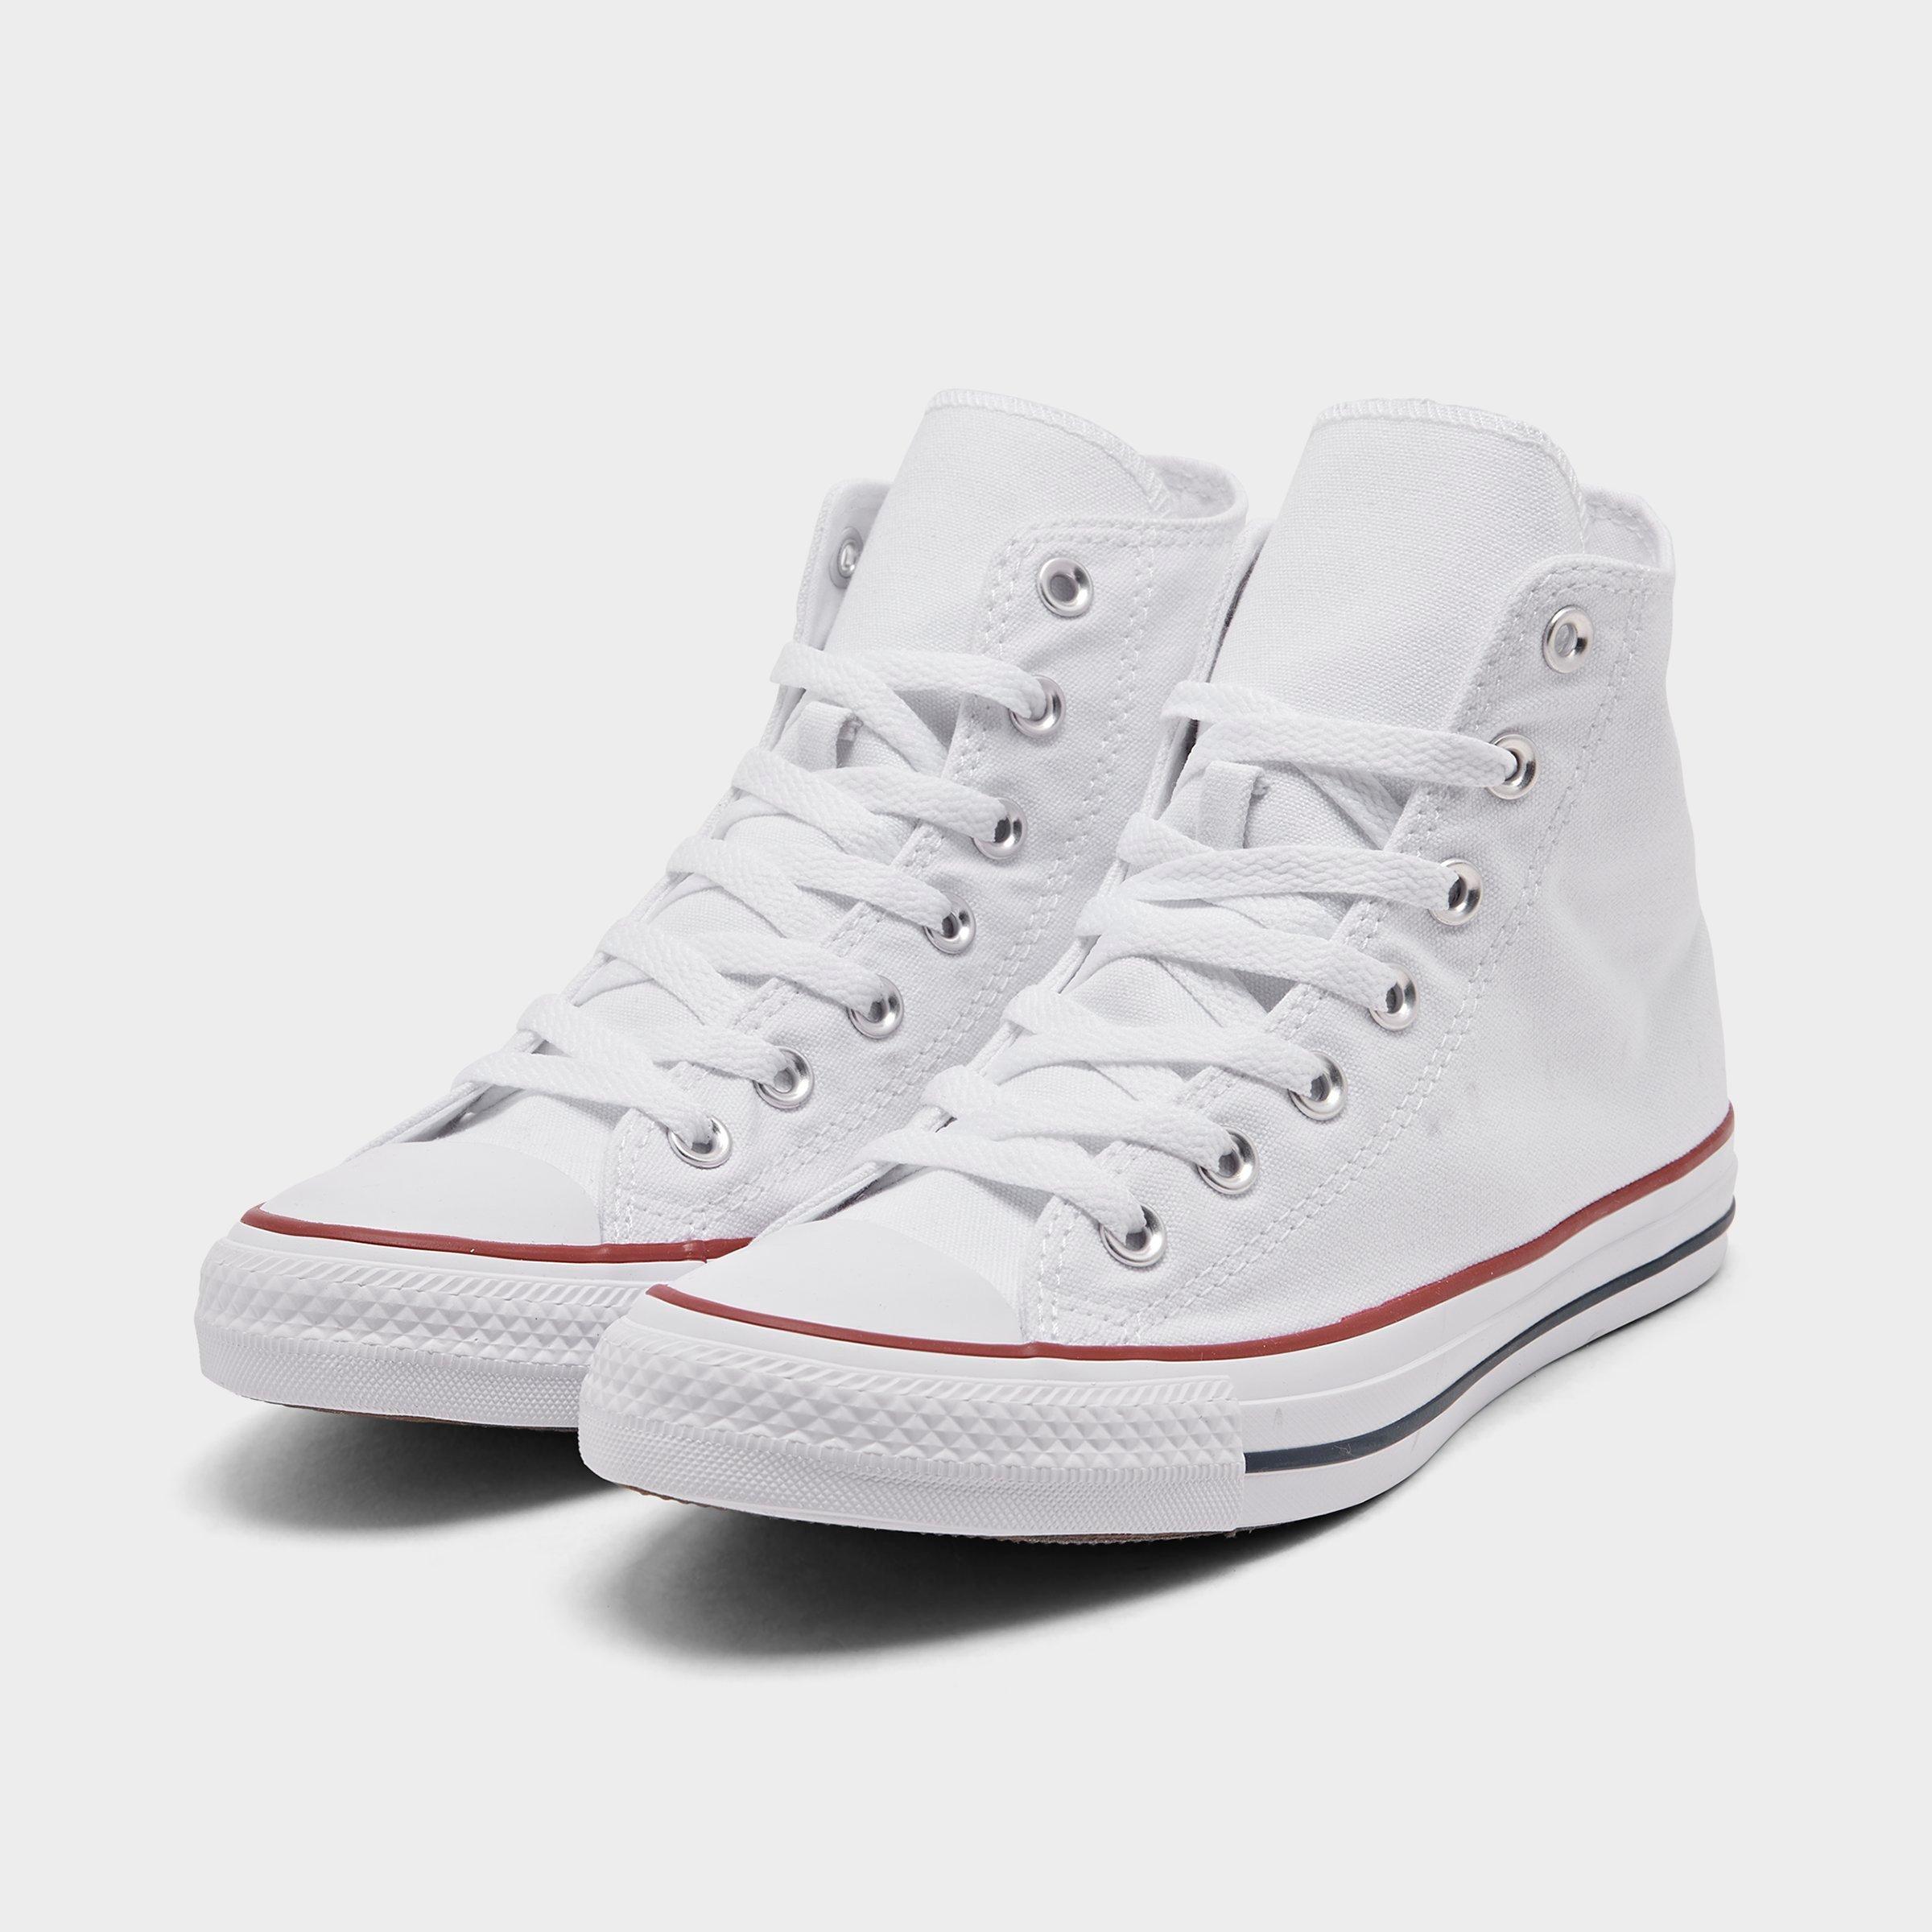 converse shoes for cheap